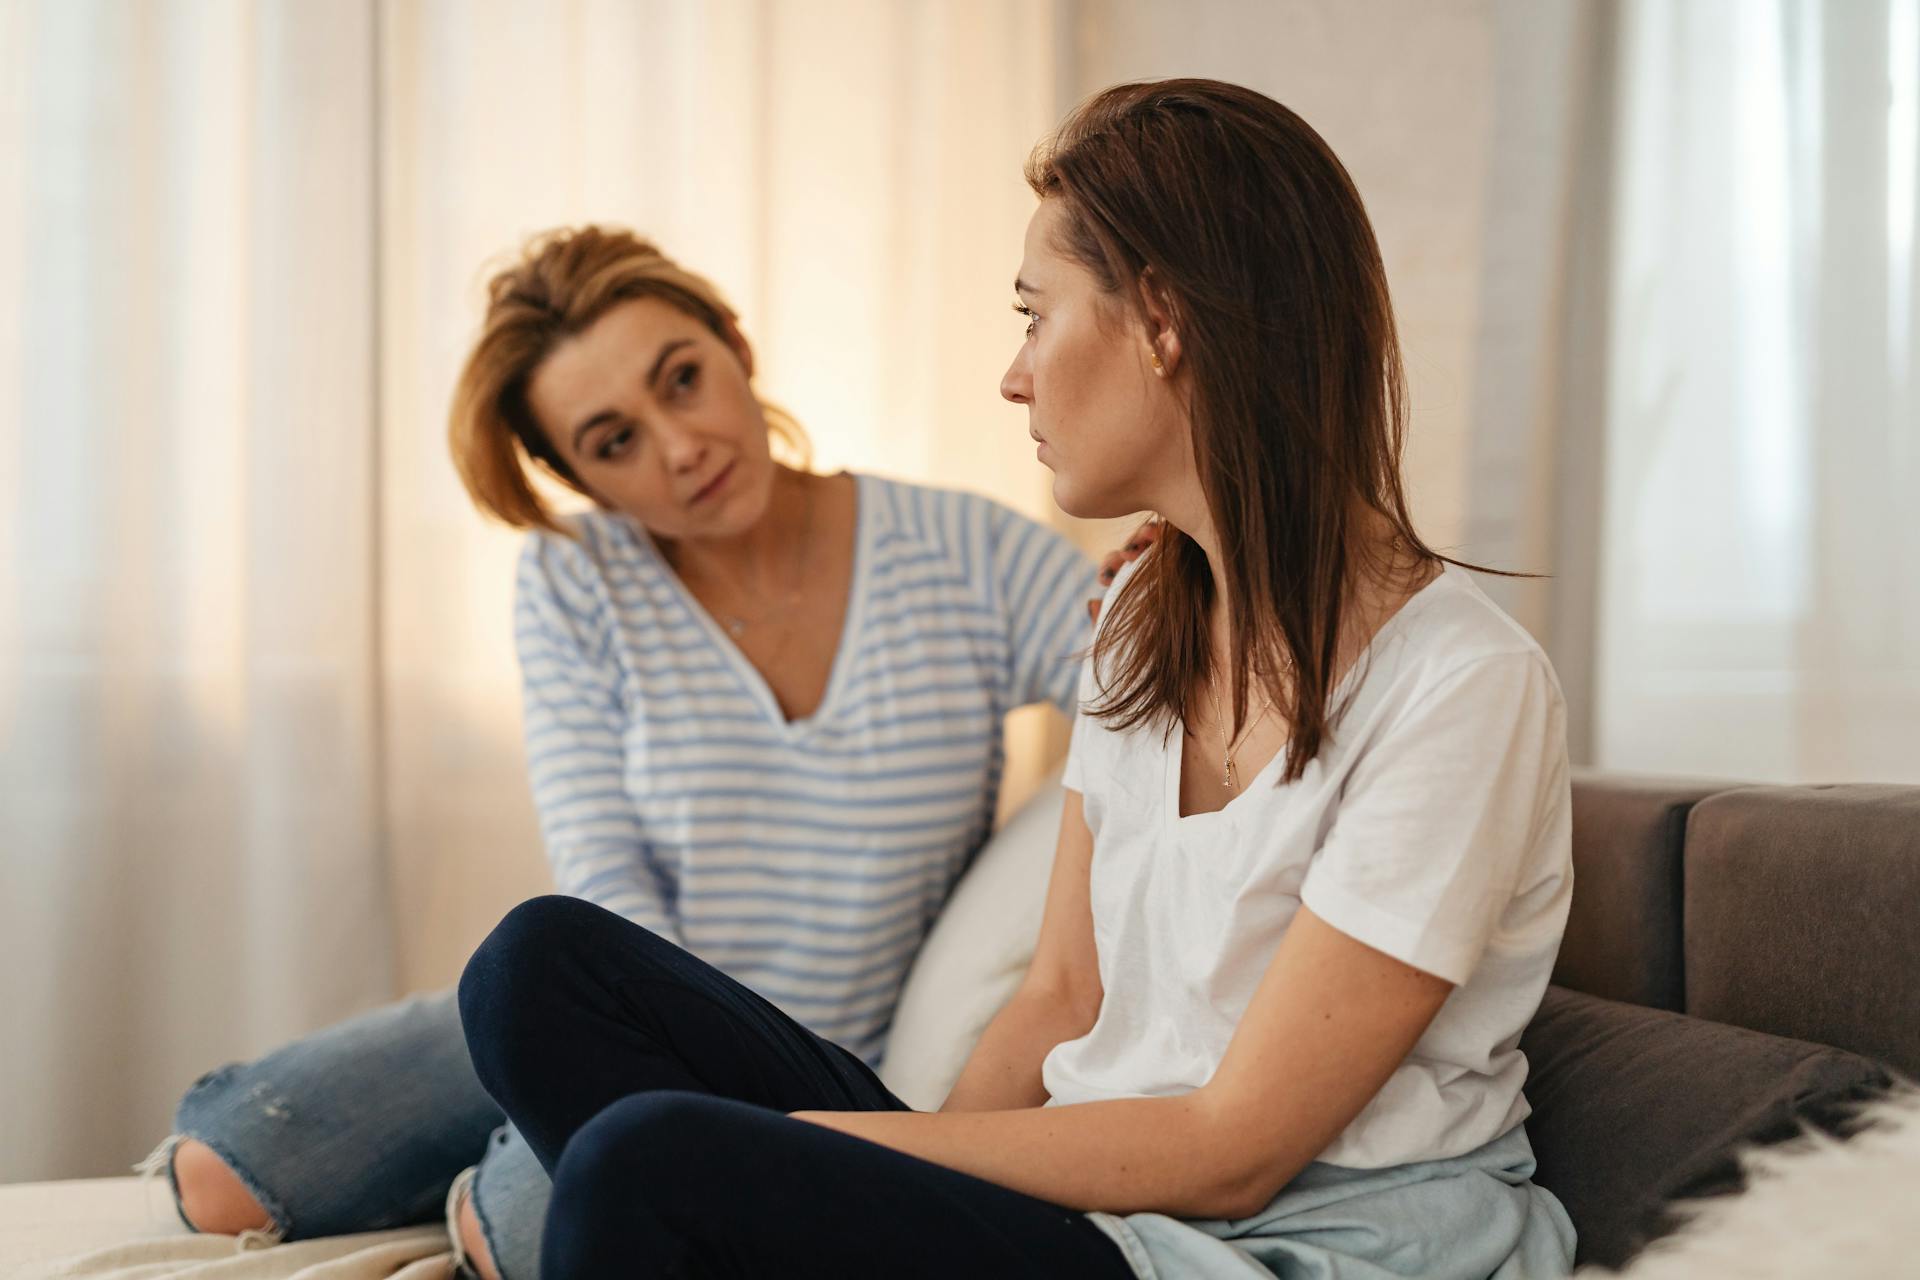 A mother and daughter talking | Source: Pexels